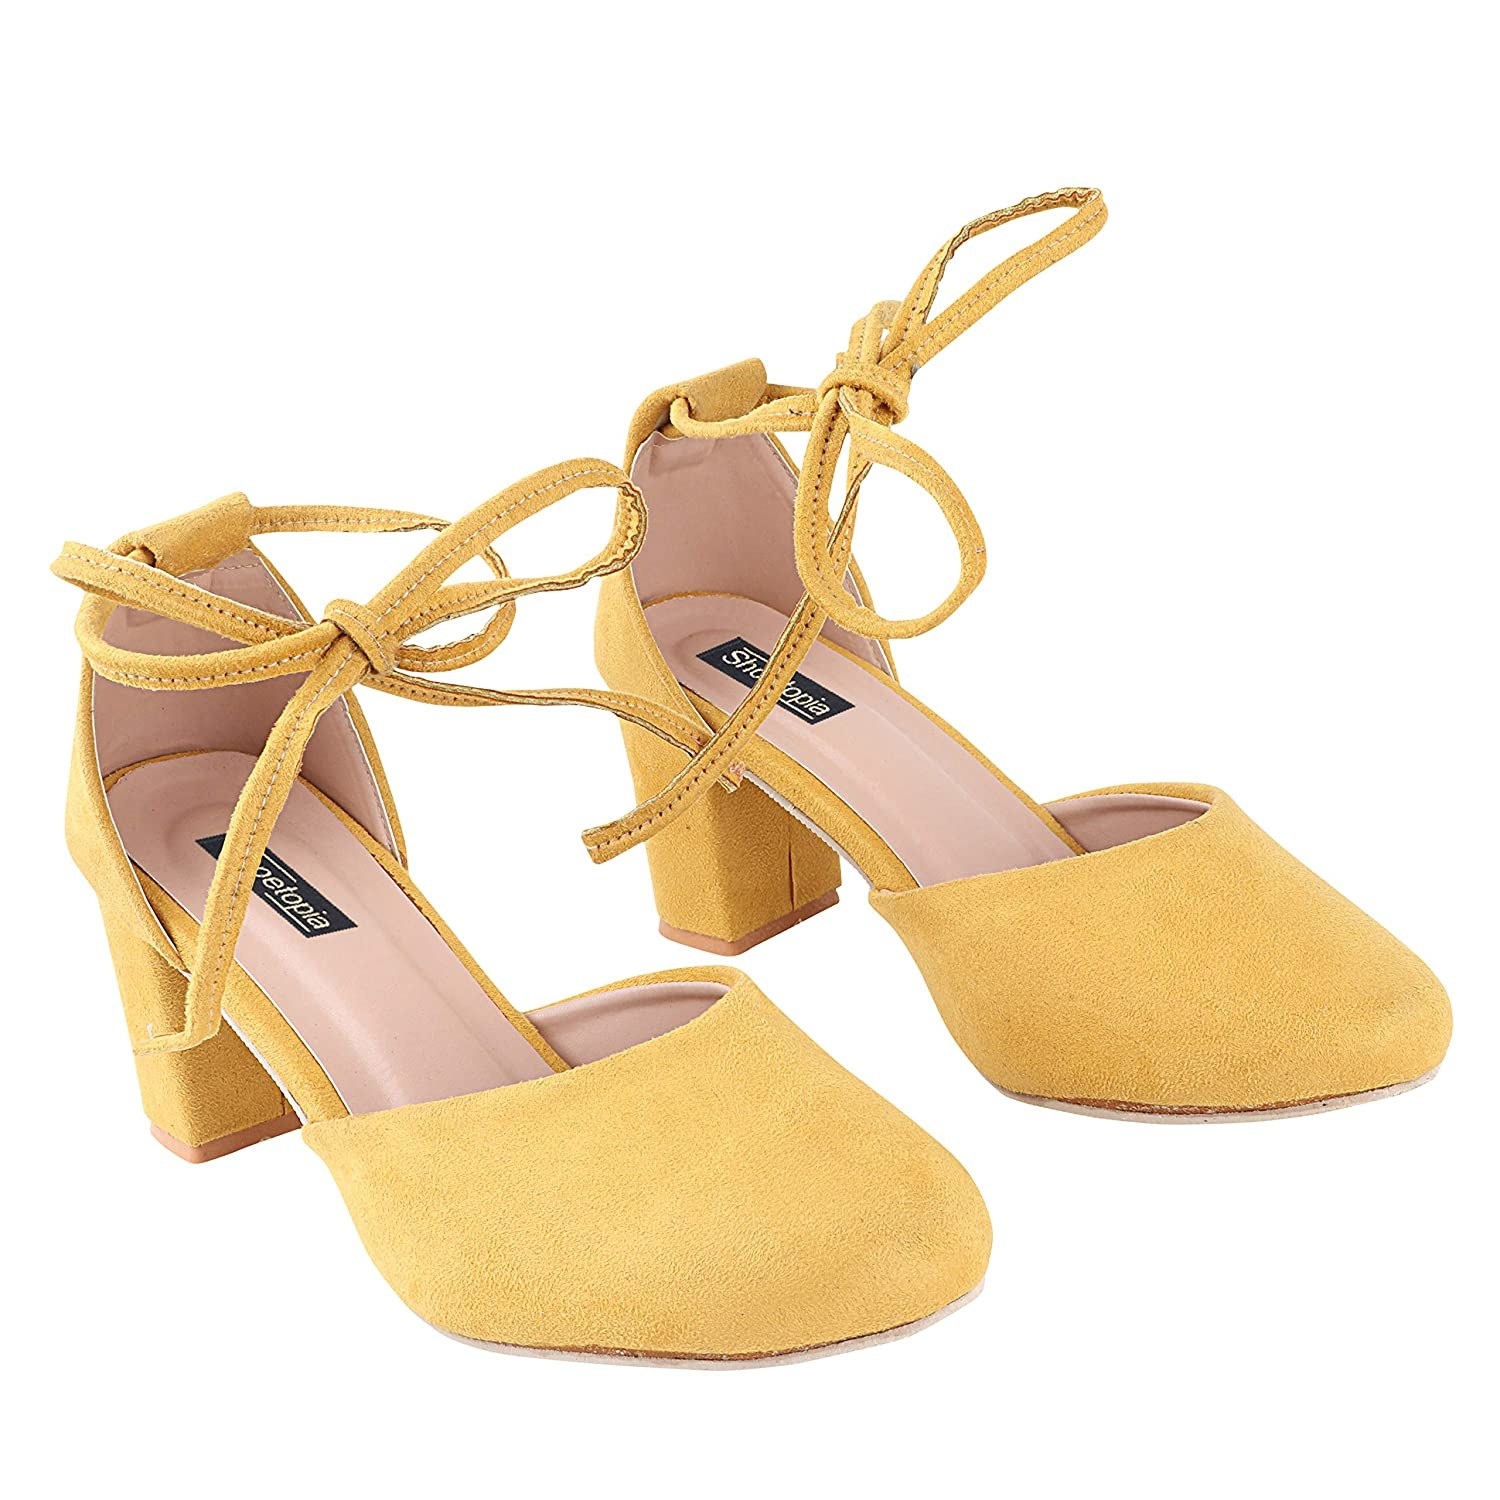 A pair of yellow suede heels with a tie-up straps around the ankles